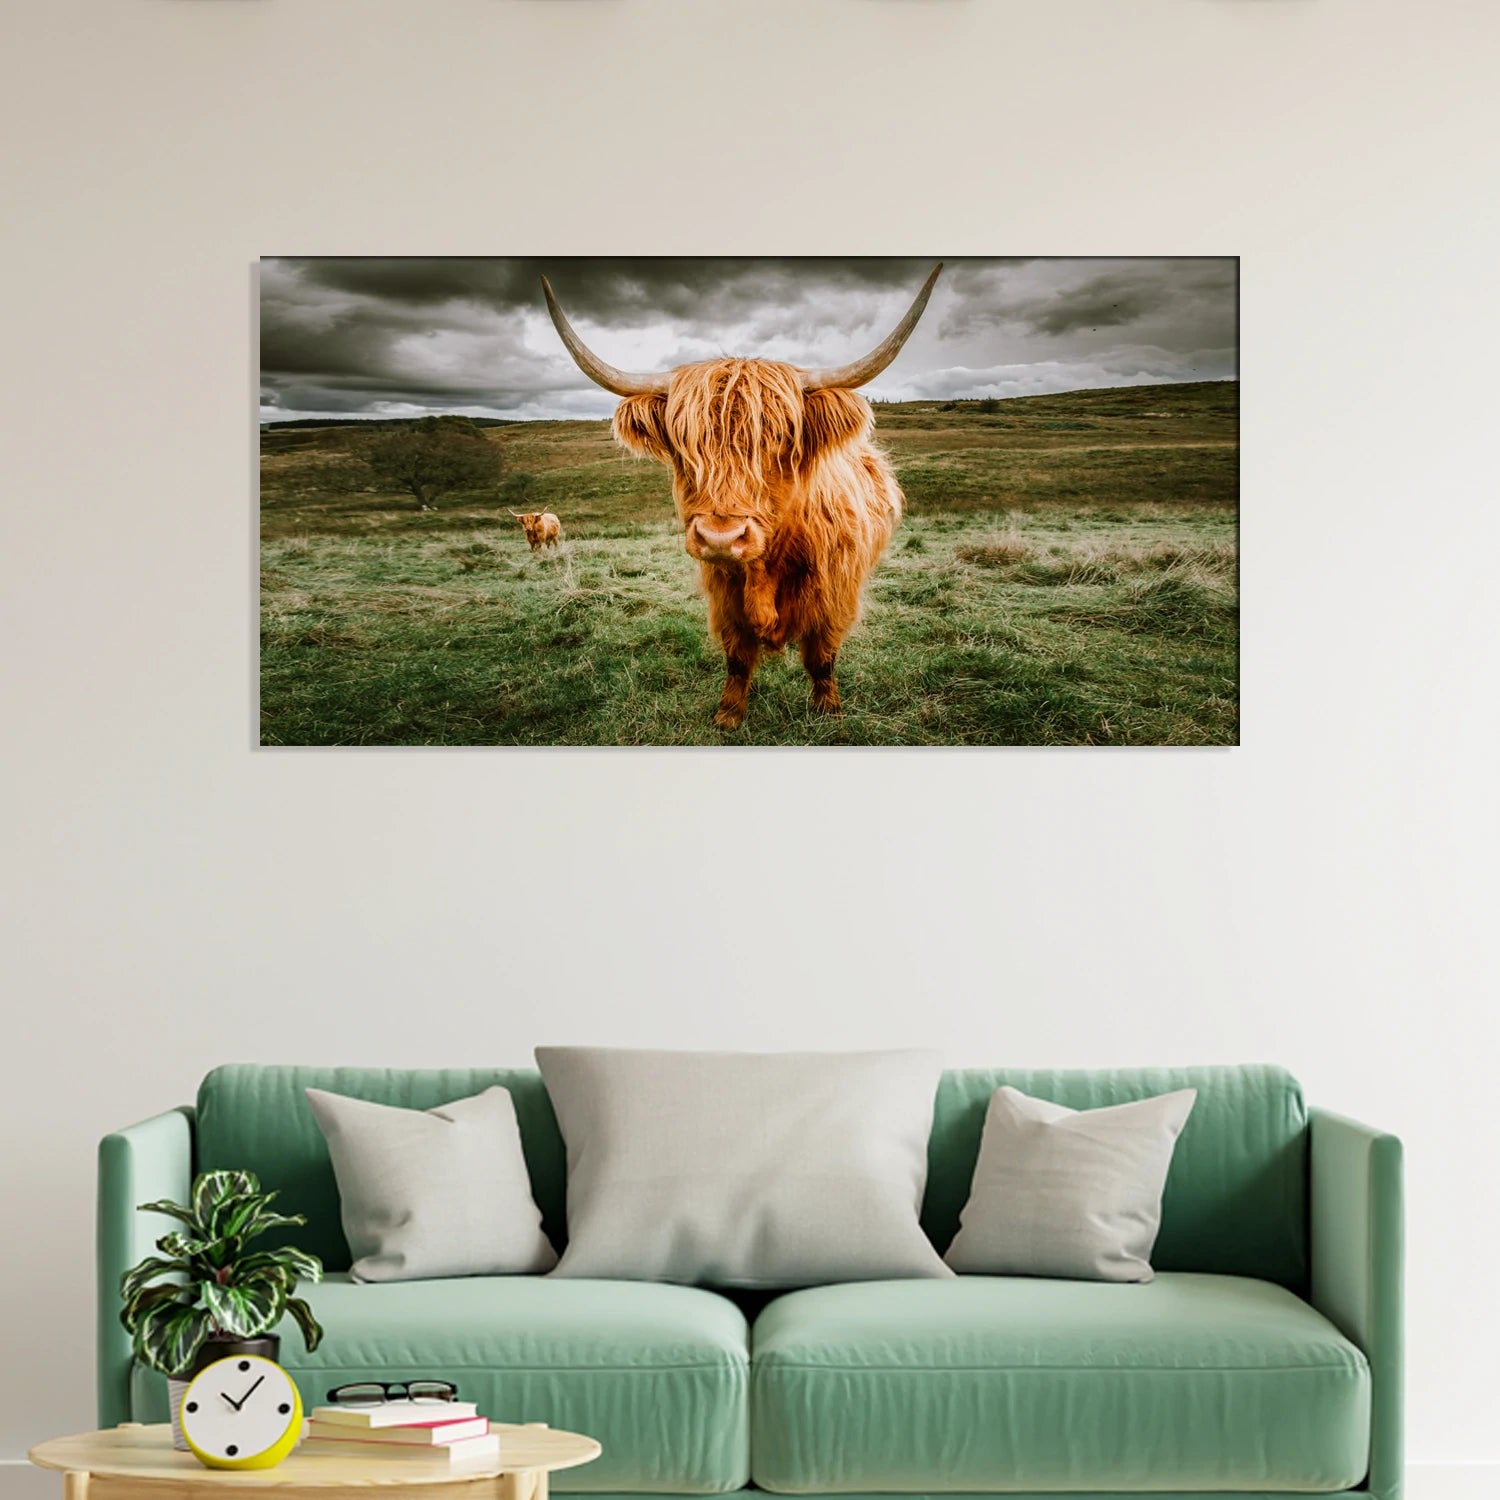 Highland Cattle With Scenic Animal Canvas Wall Painting